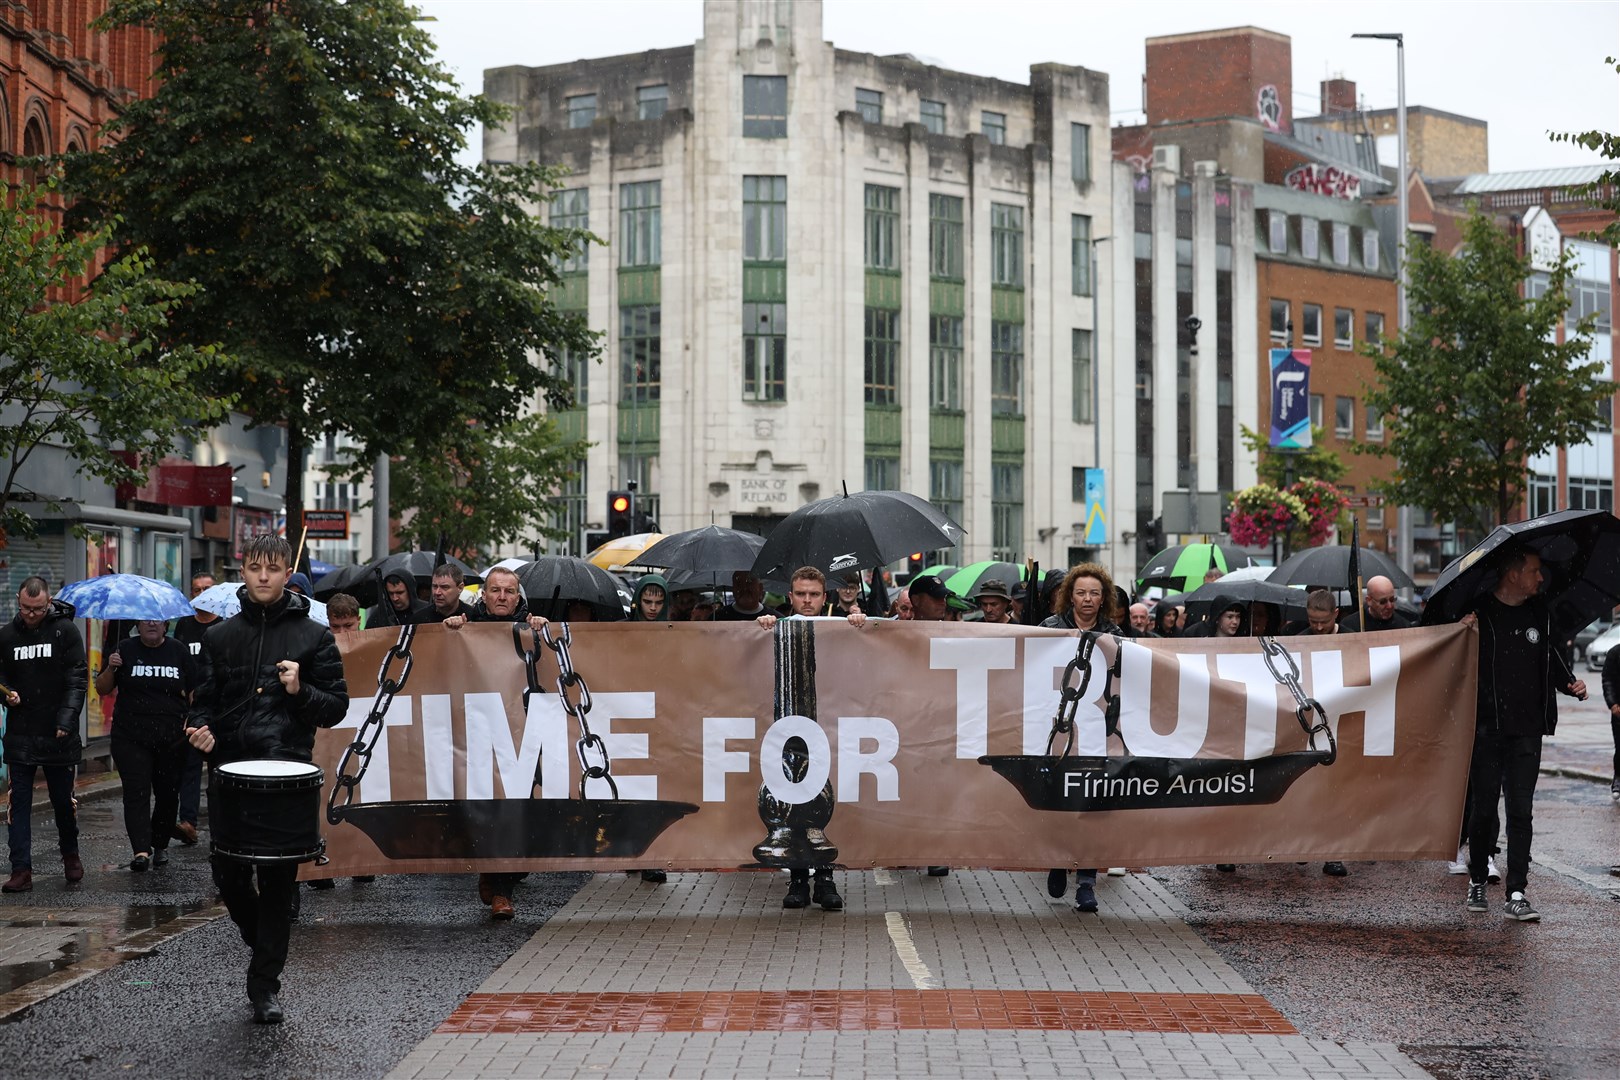 People march through Belfast city centre during the Time for Truth rally (Liam McBurney/PA)